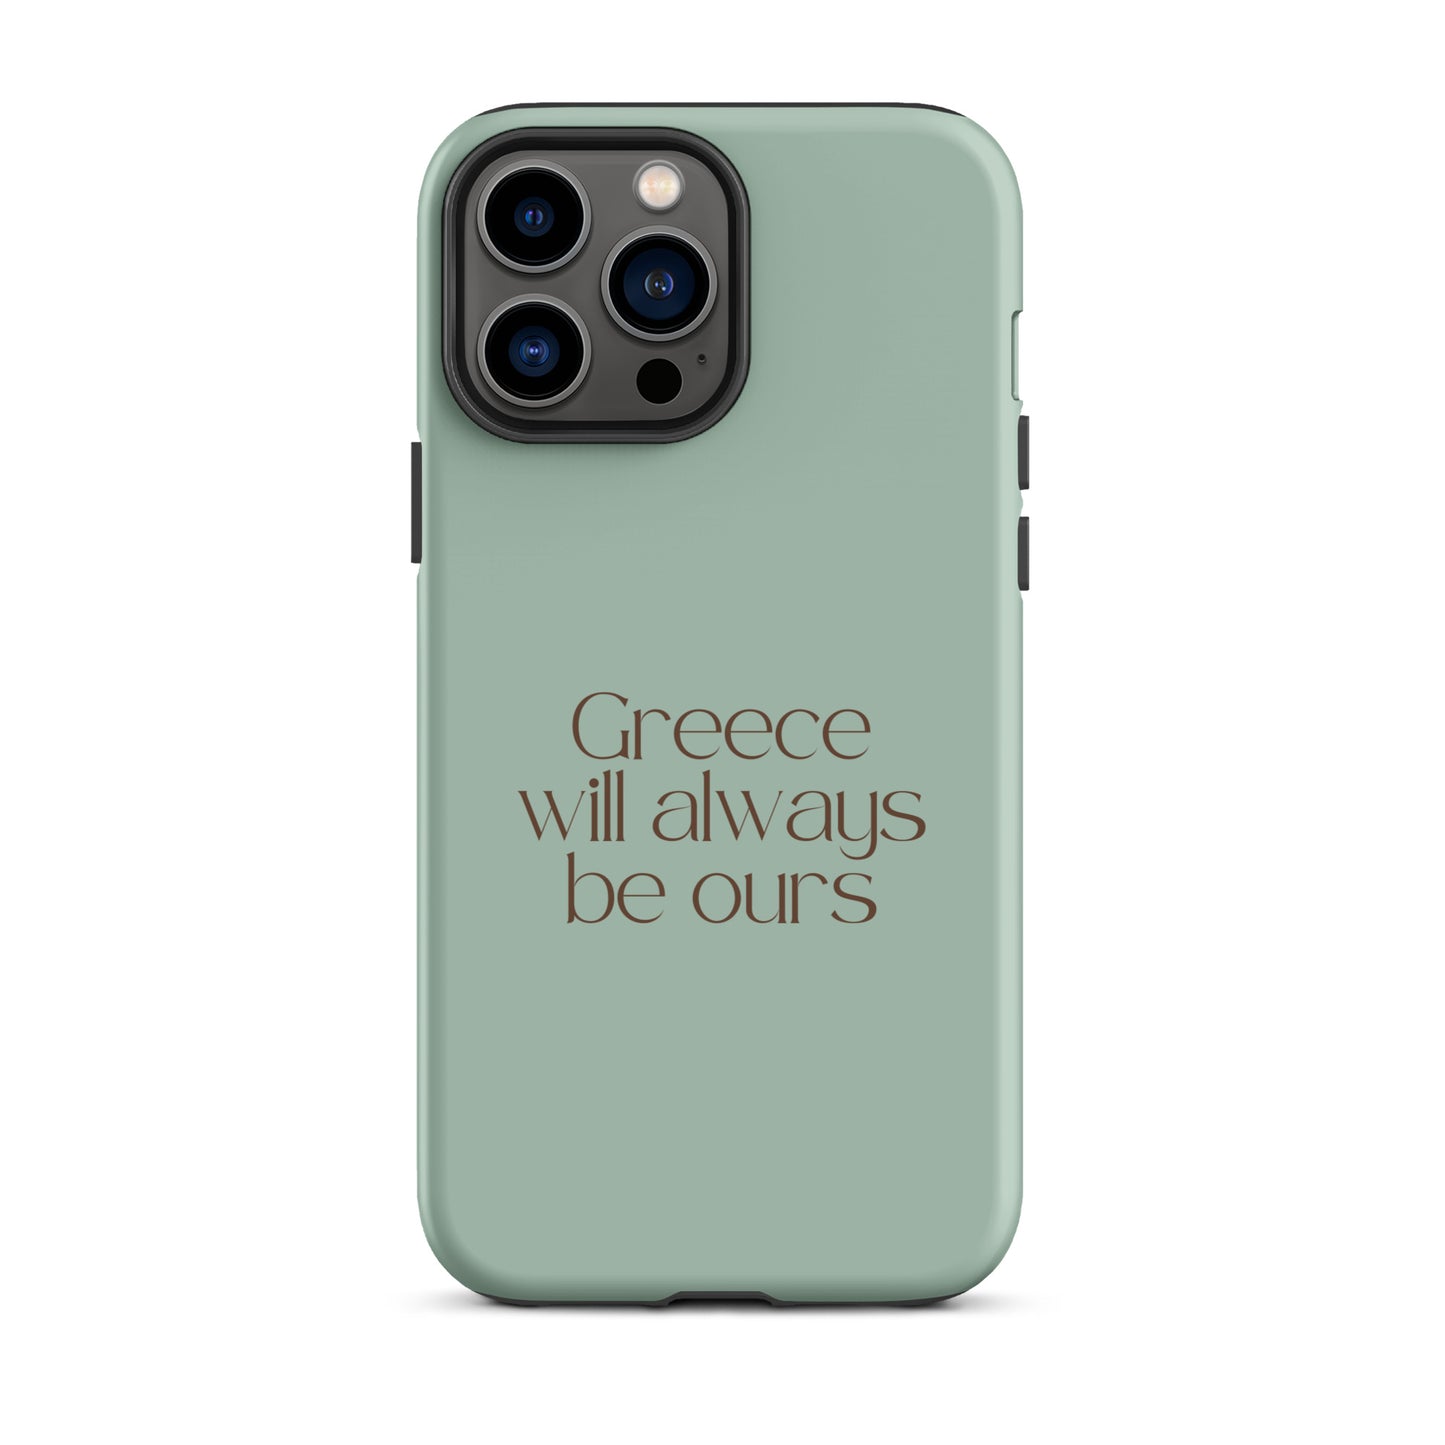 Greece is ours